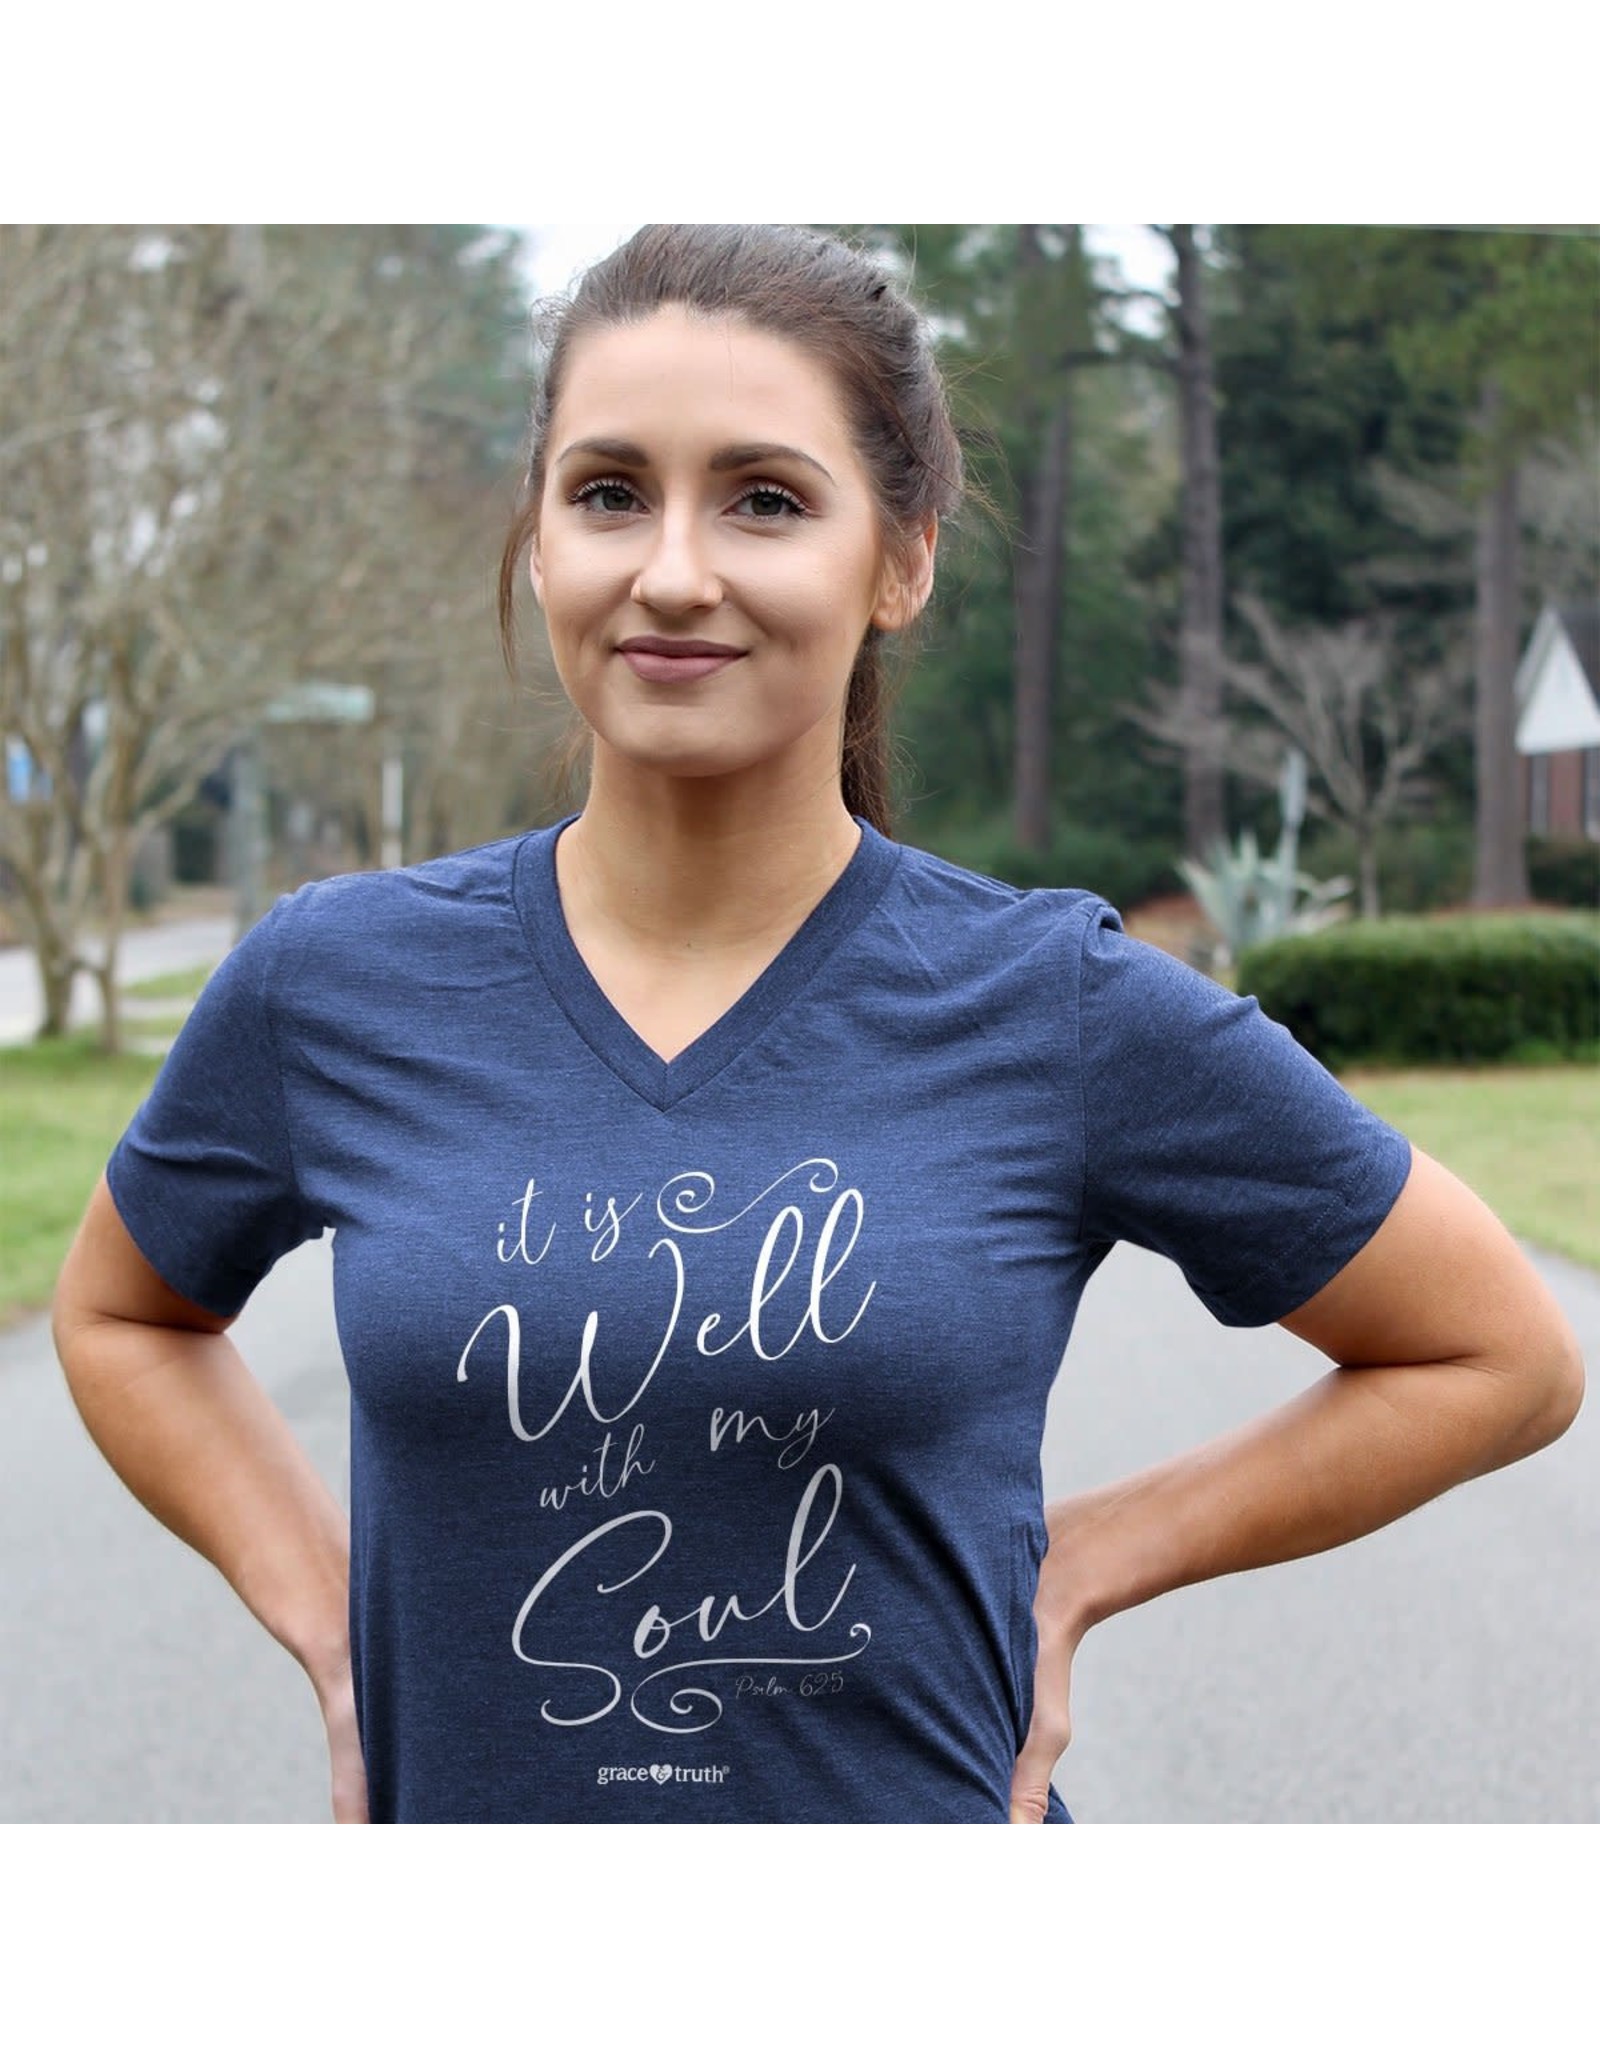 Grace & Truth Adult Shirt - It Is Well with my Soul